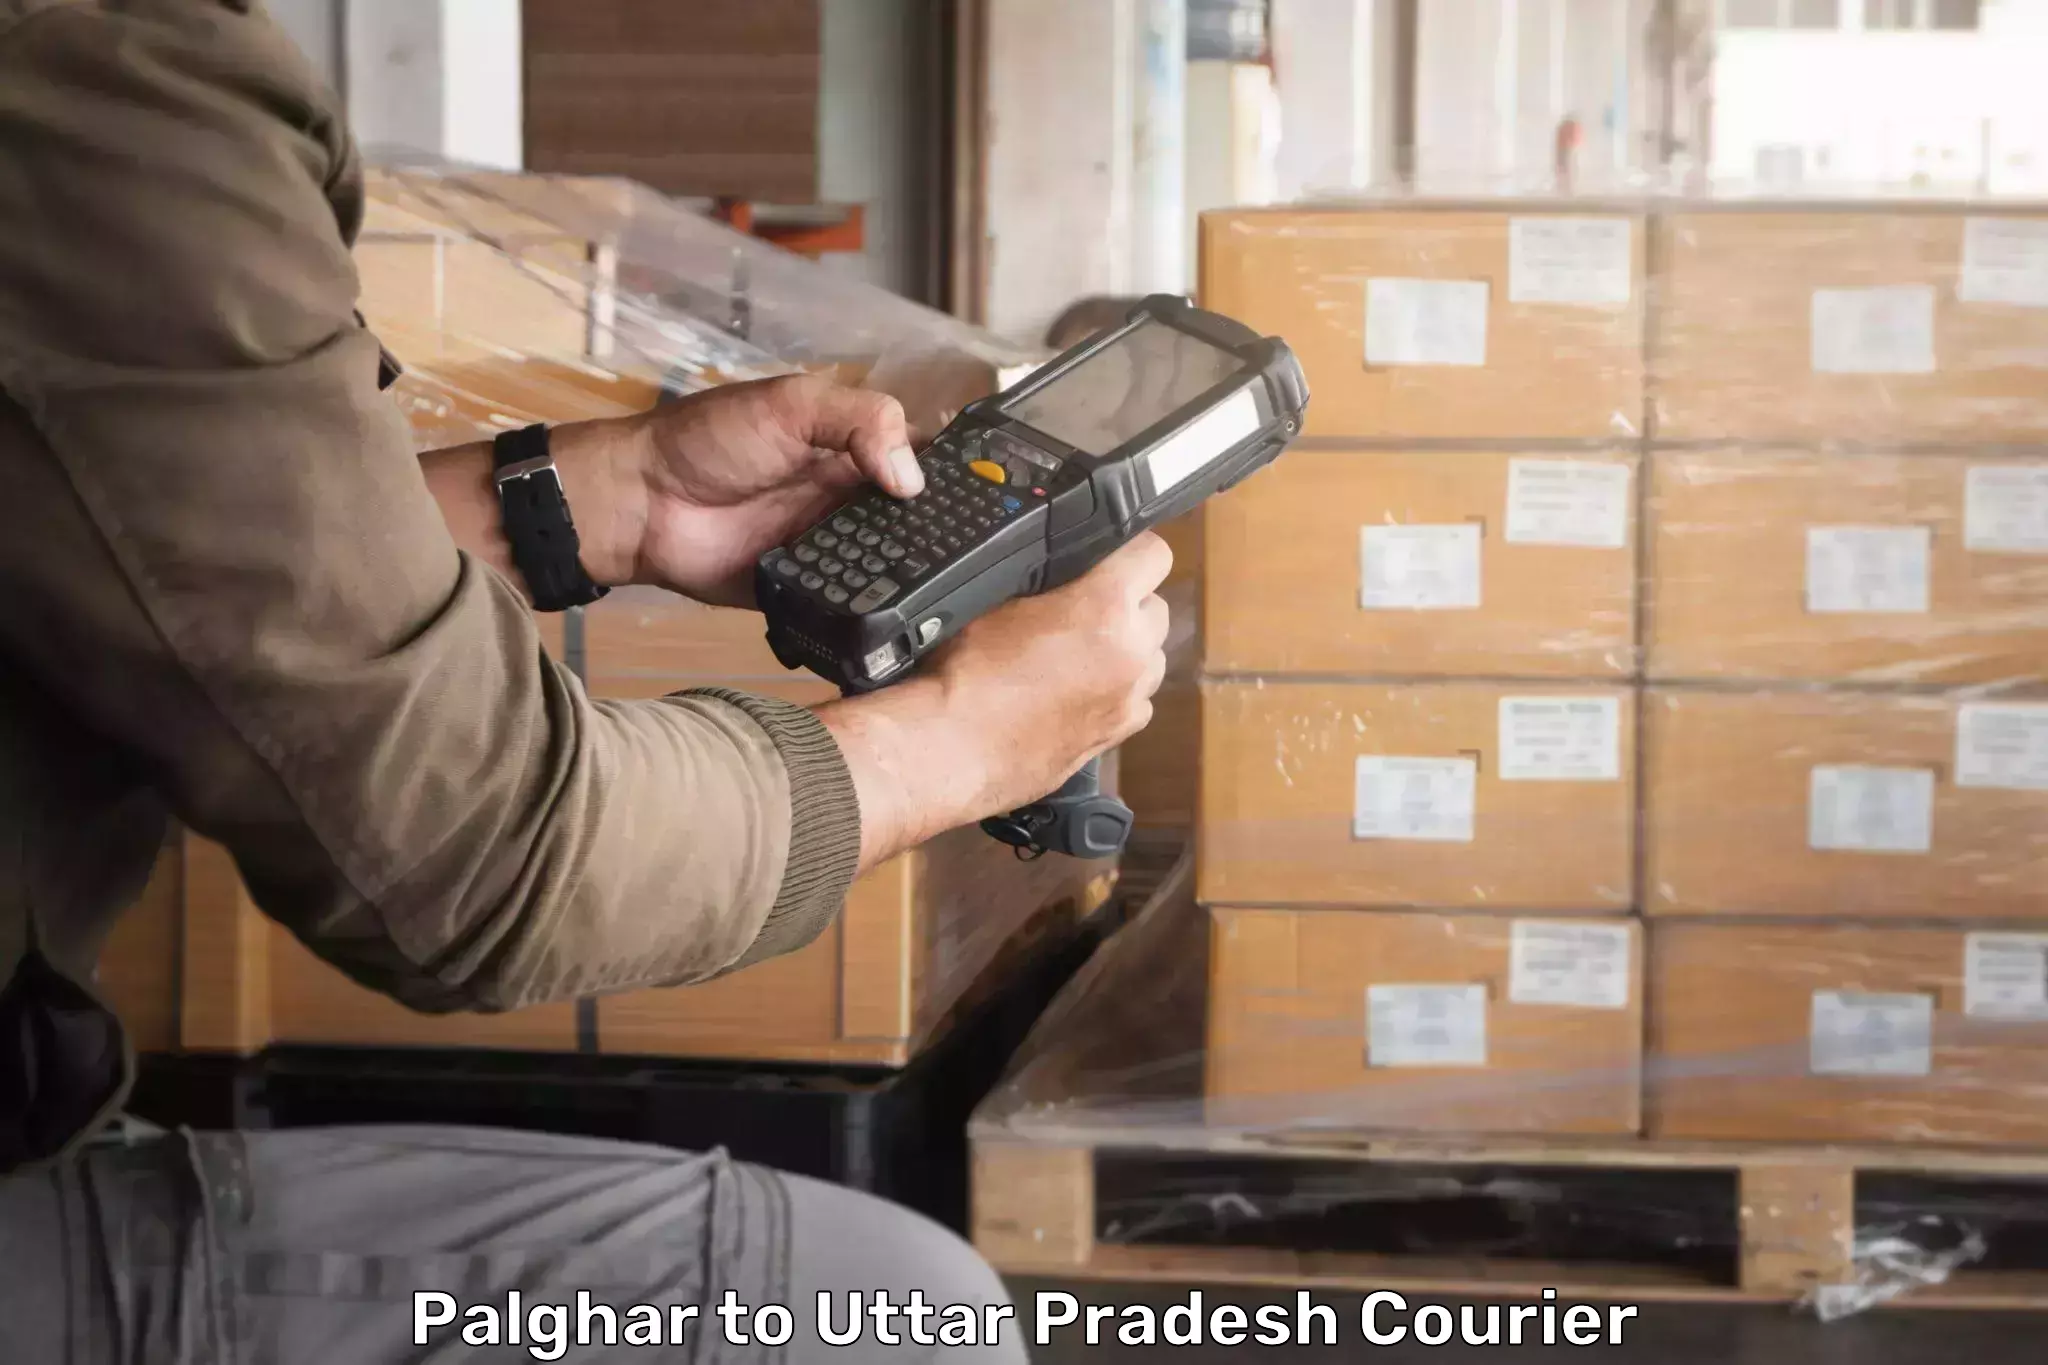 Local delivery service Palghar to Kulpahar